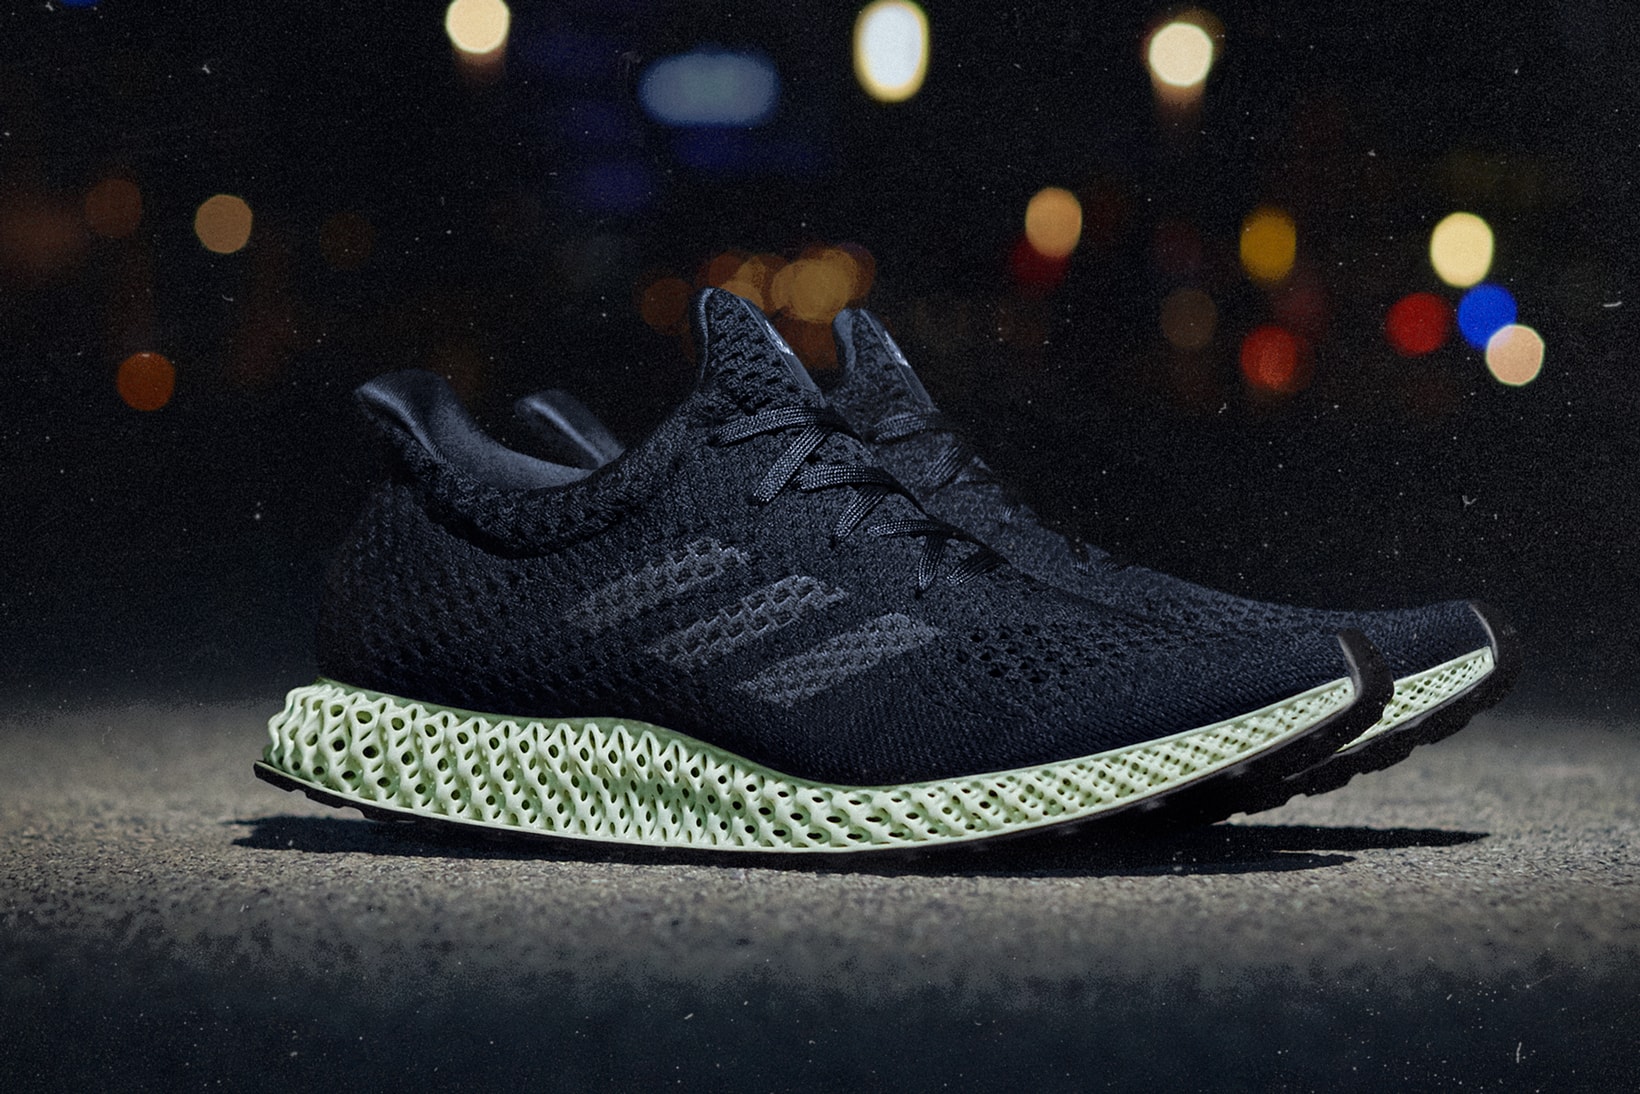 adidas FUTURECRAFT 4D 2018 February 10 Release date info new york city nyc app reservations sneakers shoes footwear